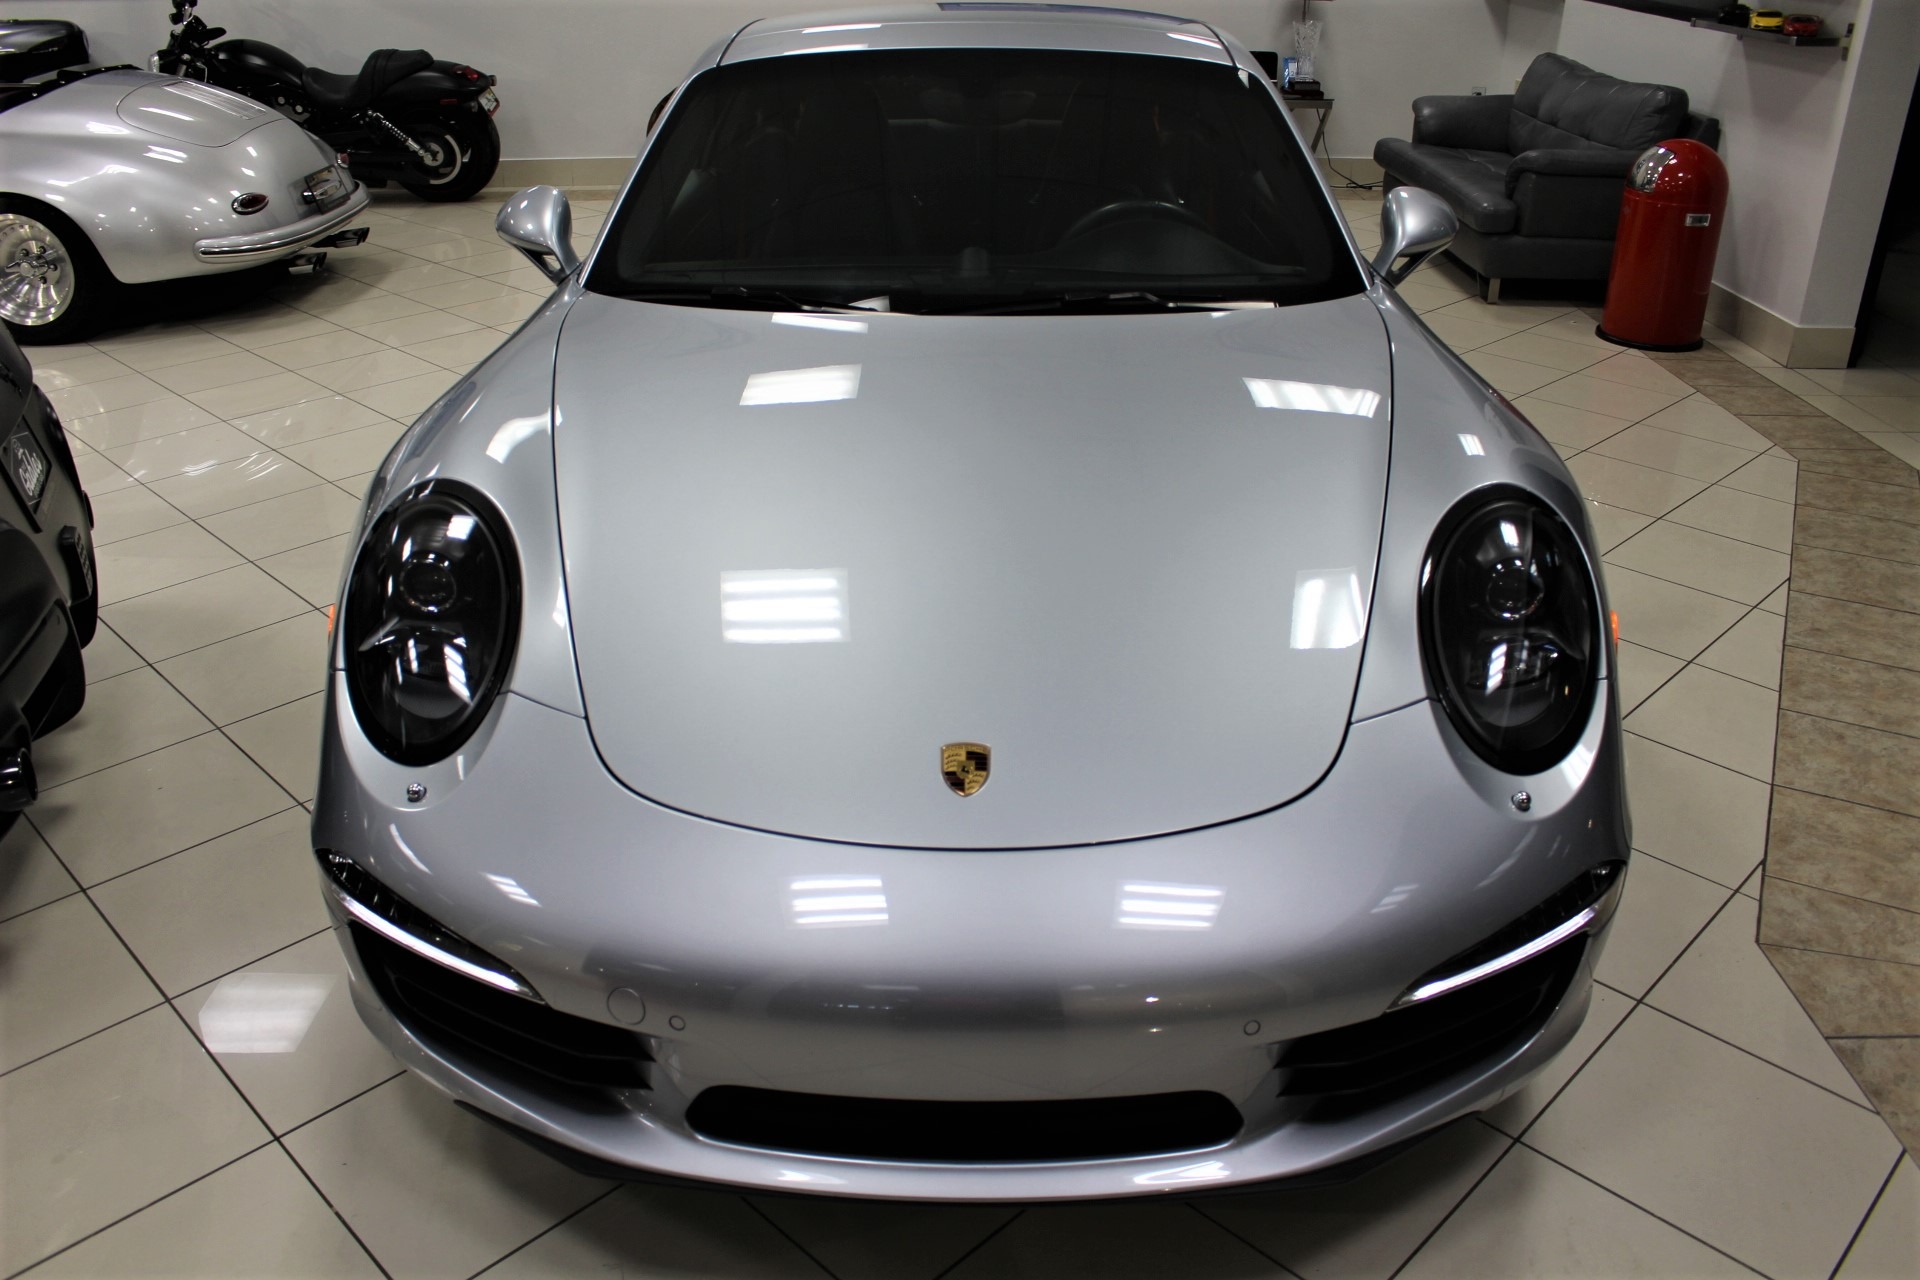 Used 2016 Porsche 911 Carrera 4S for sale Sold at The Gables Sports Cars in Miami FL 33146 4